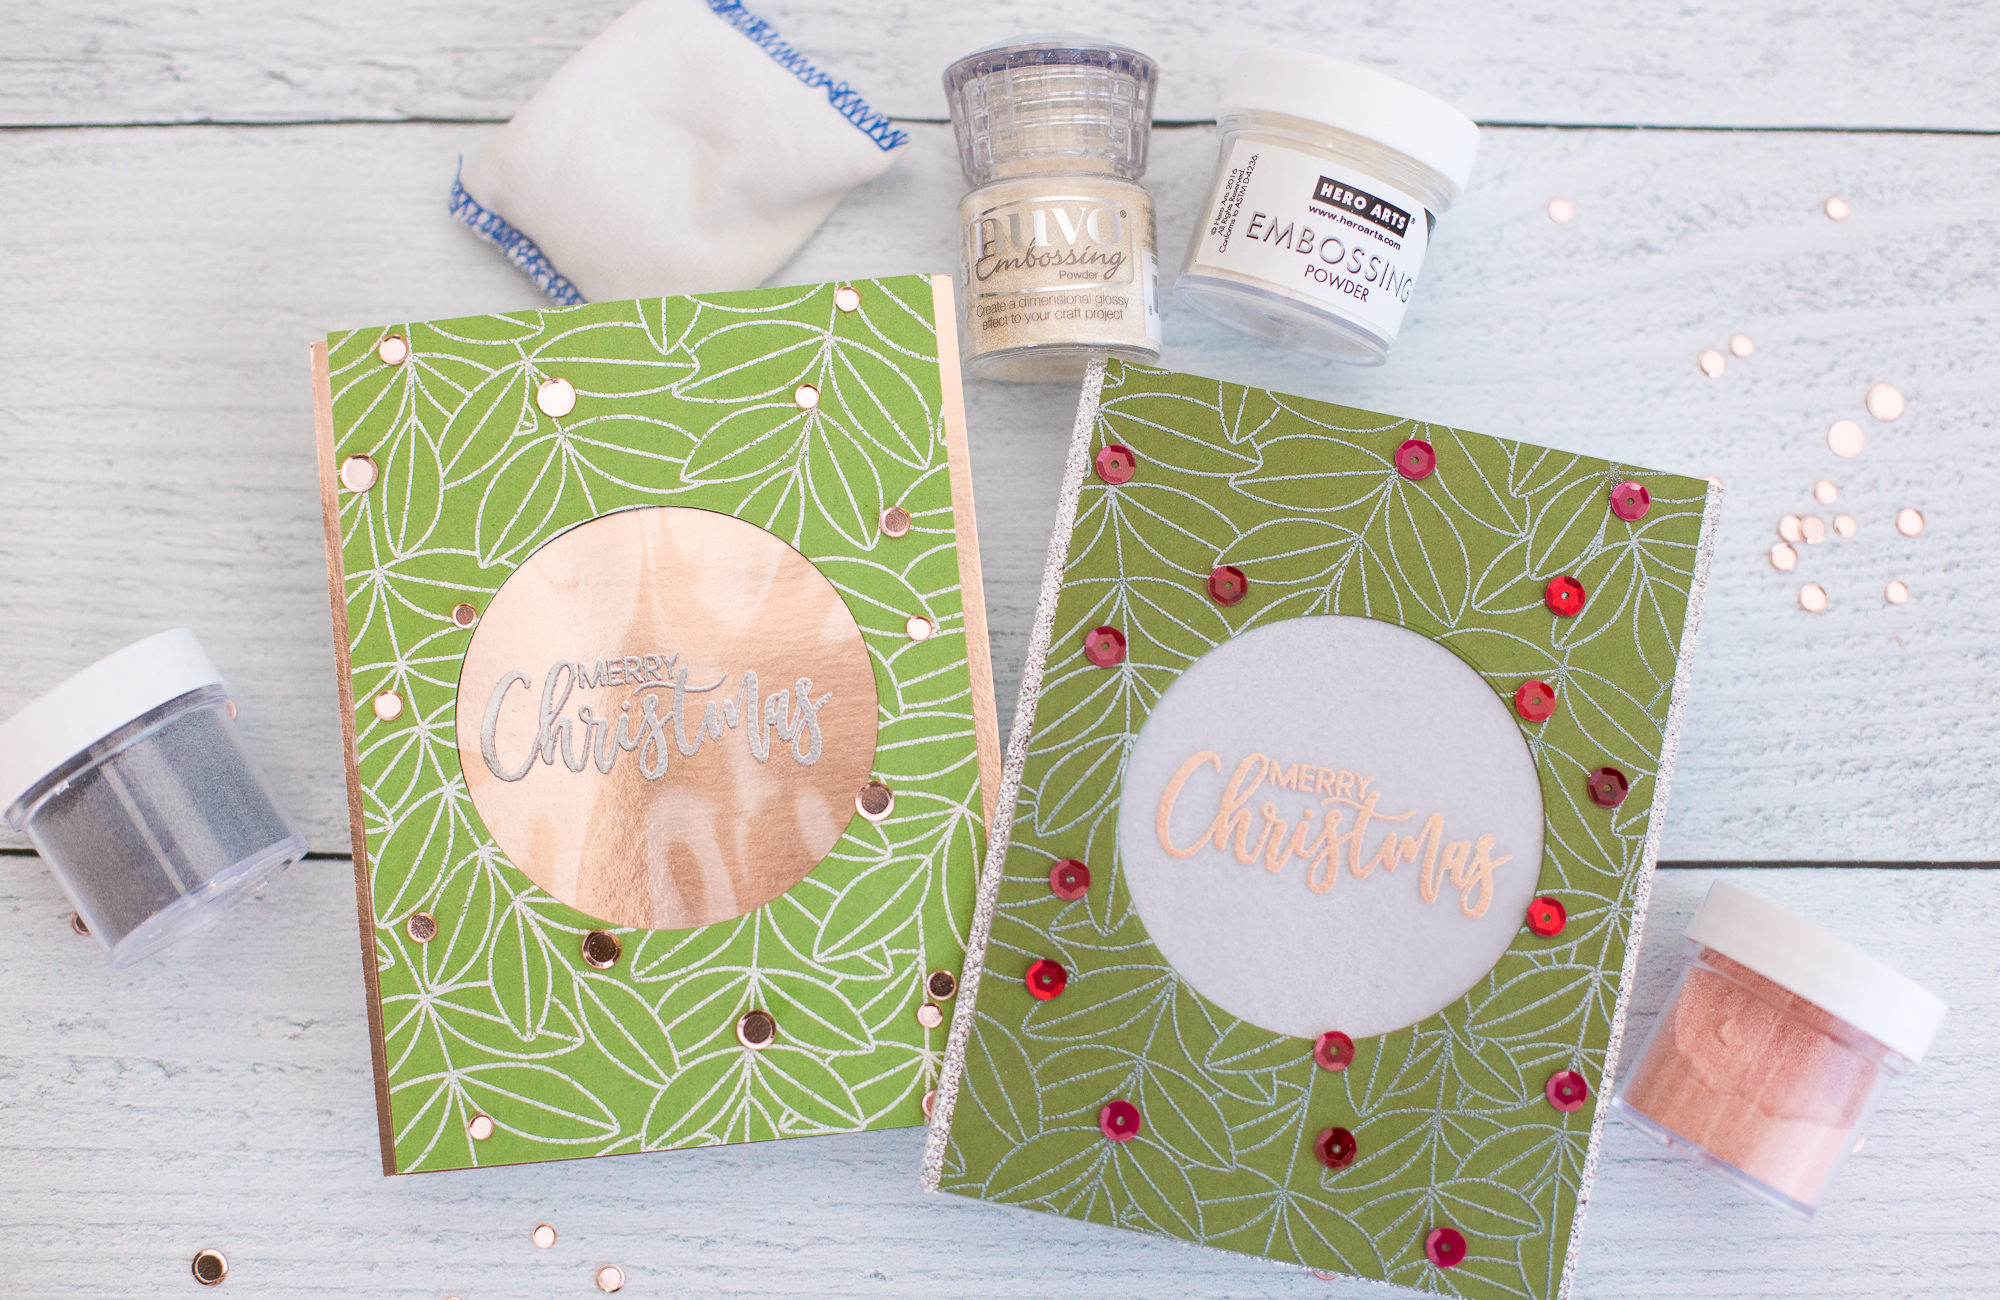 Embossing Powder Made at Home - Observations